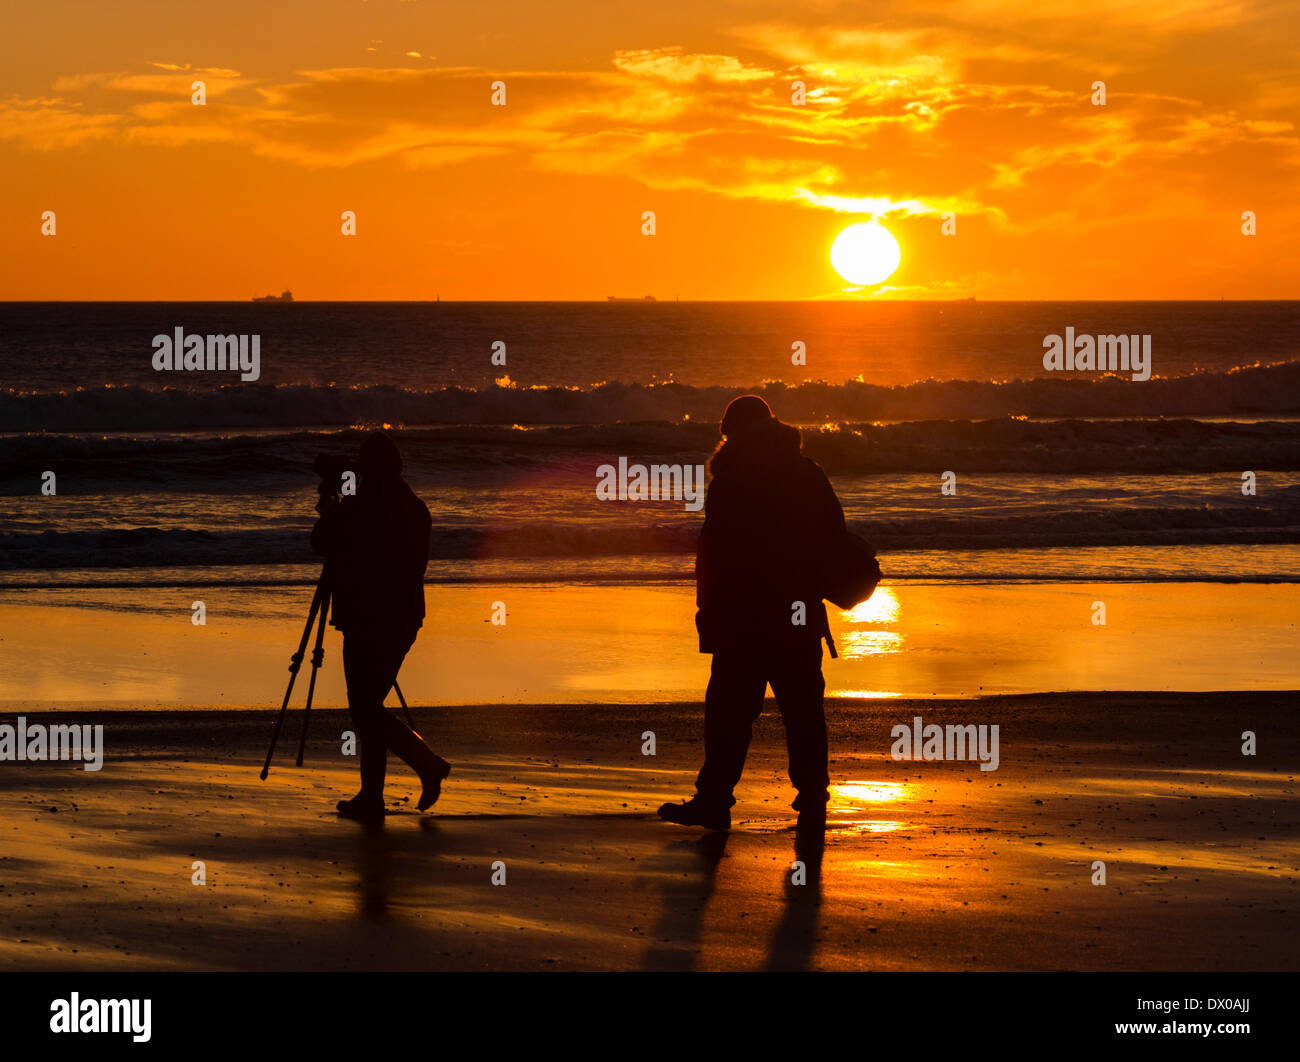 Sunday, 16th, March, 2014, Seaton Carew beach near Hartlepool north east England. Photographer at sunrise on Seaton Carew beach on the north east coast of England. Temperature in the mid to high teens are forecast for parts of the UK on Sunday. Stock Photo